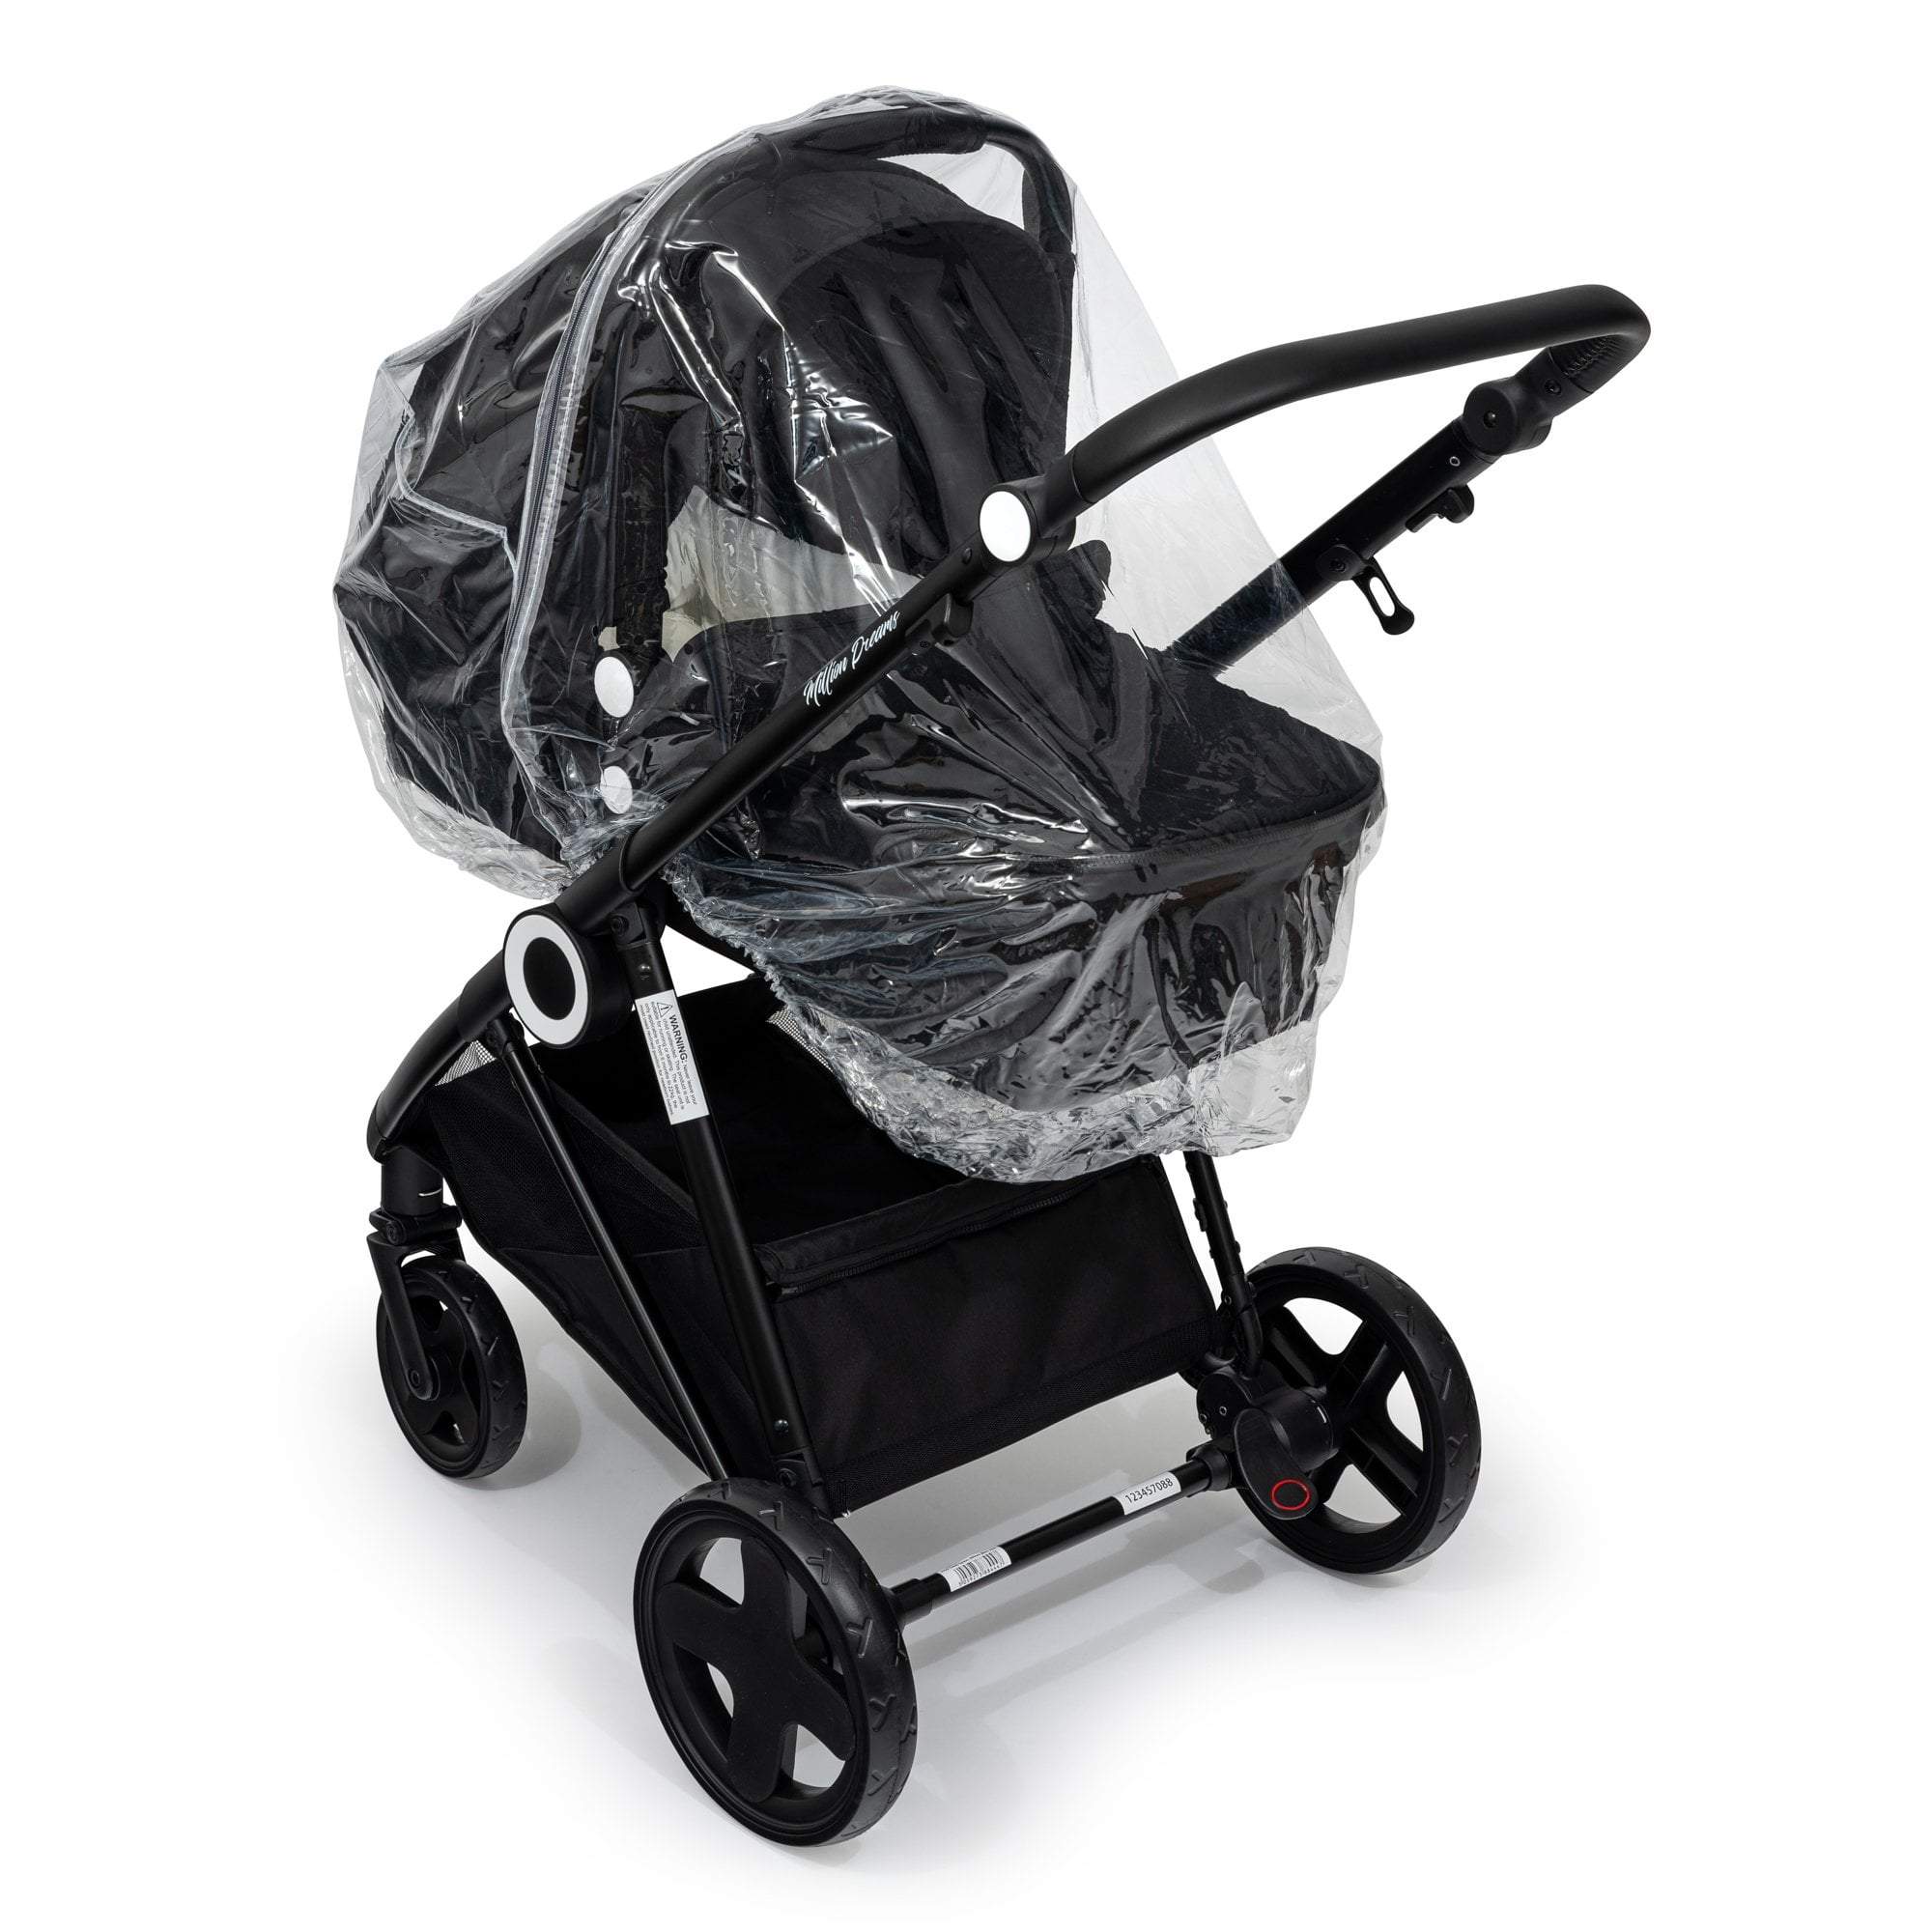 Carrycot Raincover Compatible With Formula - Fits All Models - For Your Little One